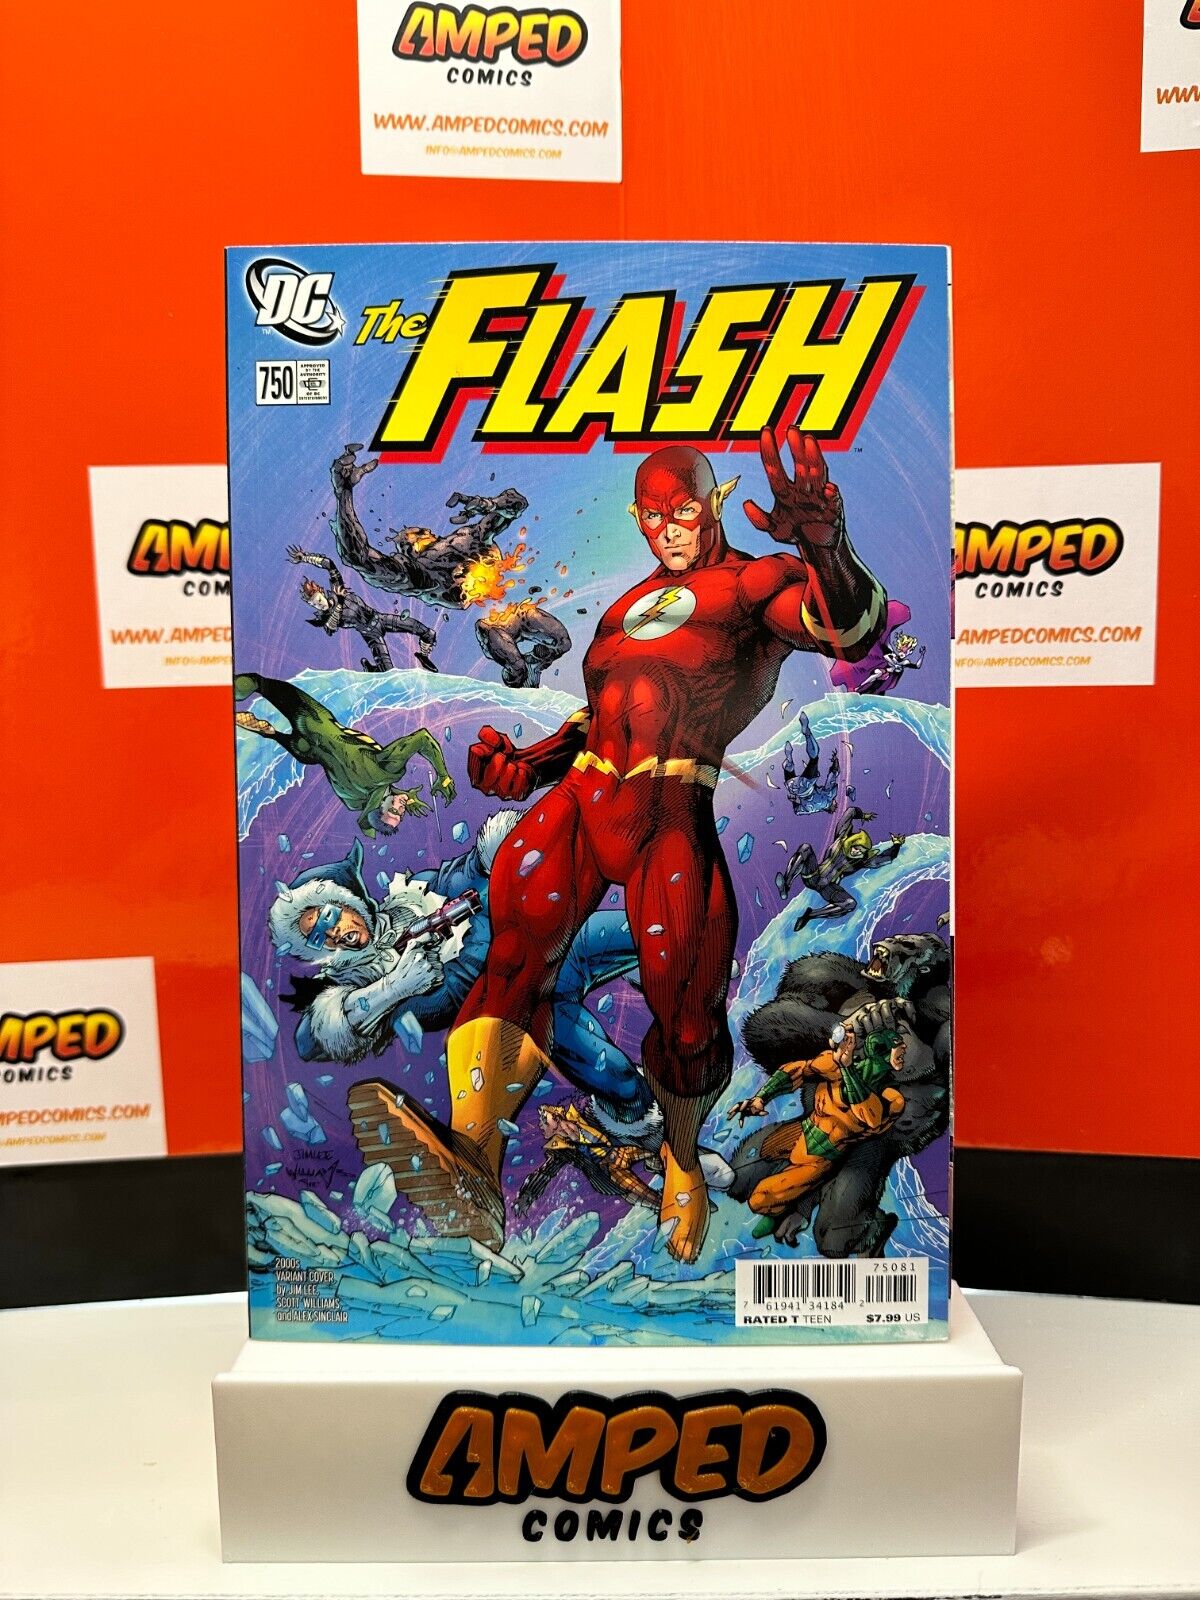 The Flash # 750 80-PAGE SPECIAL DC Comics